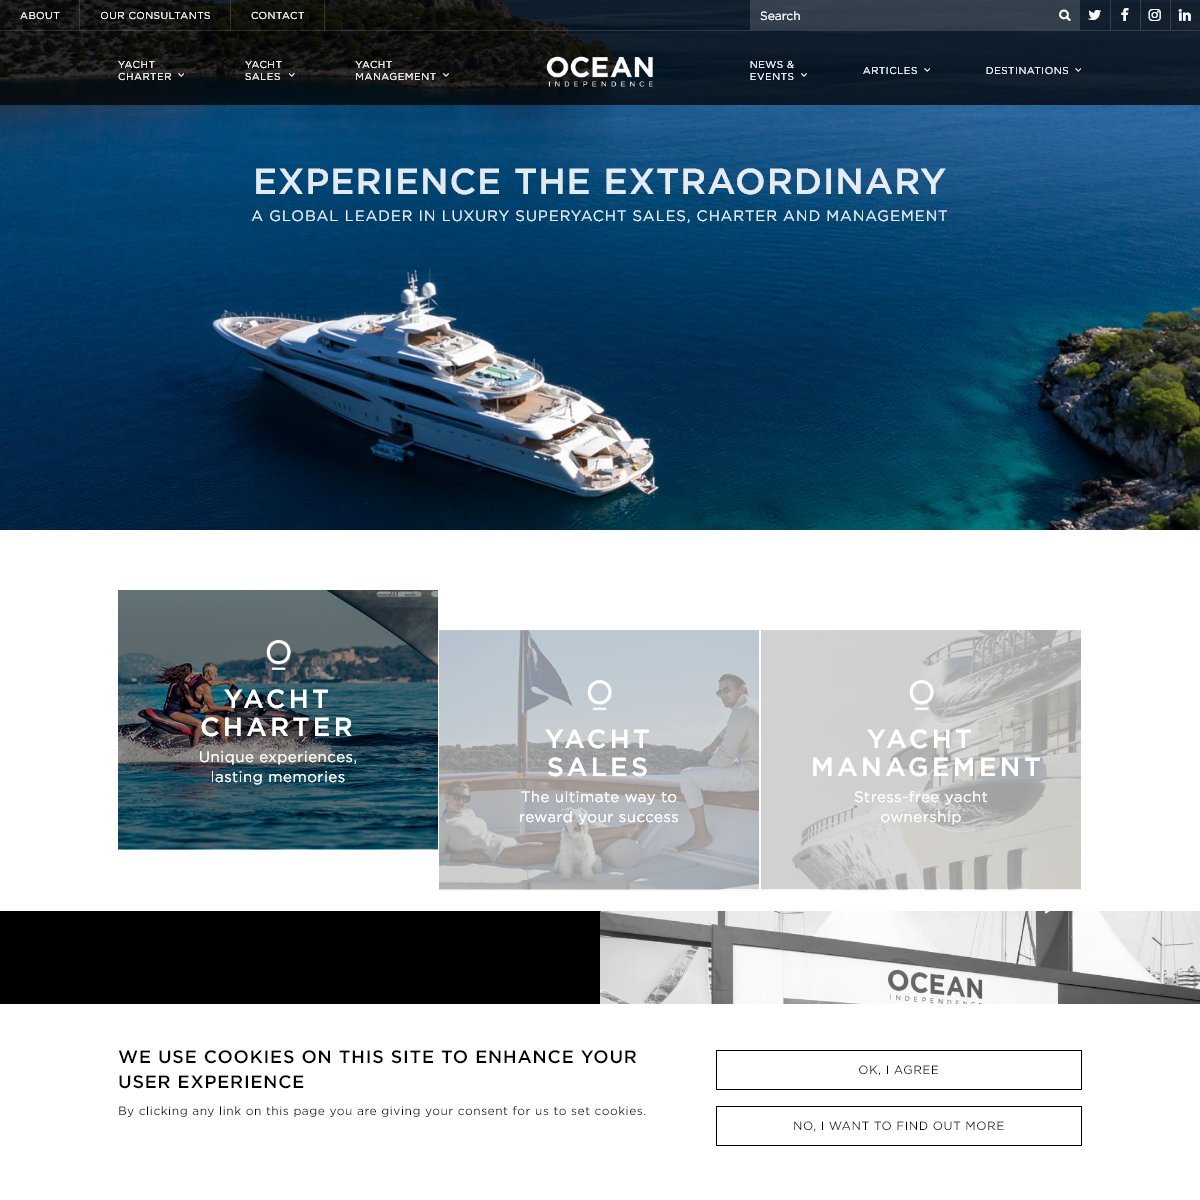 A complete backup of oceanindependence.com